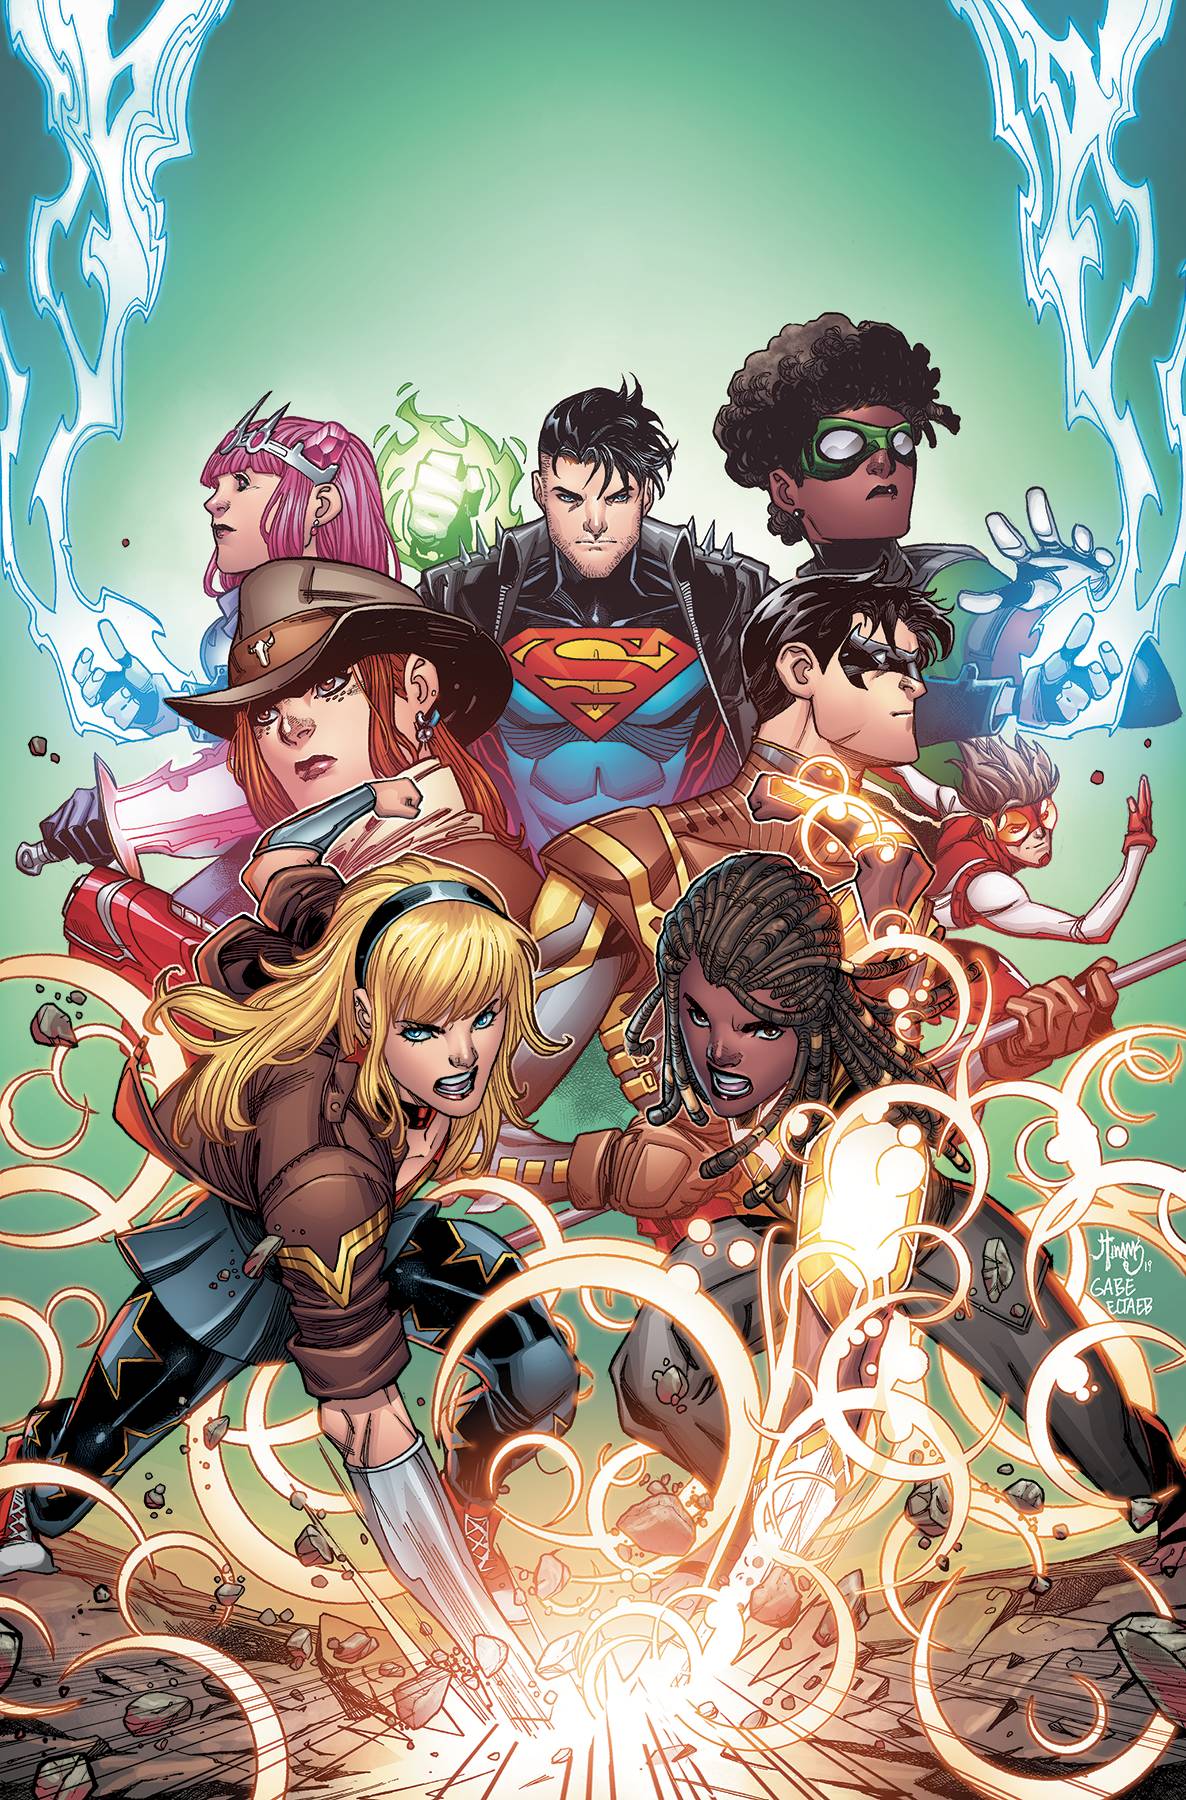 12/04/2019 YOUNG JUSTICE #11